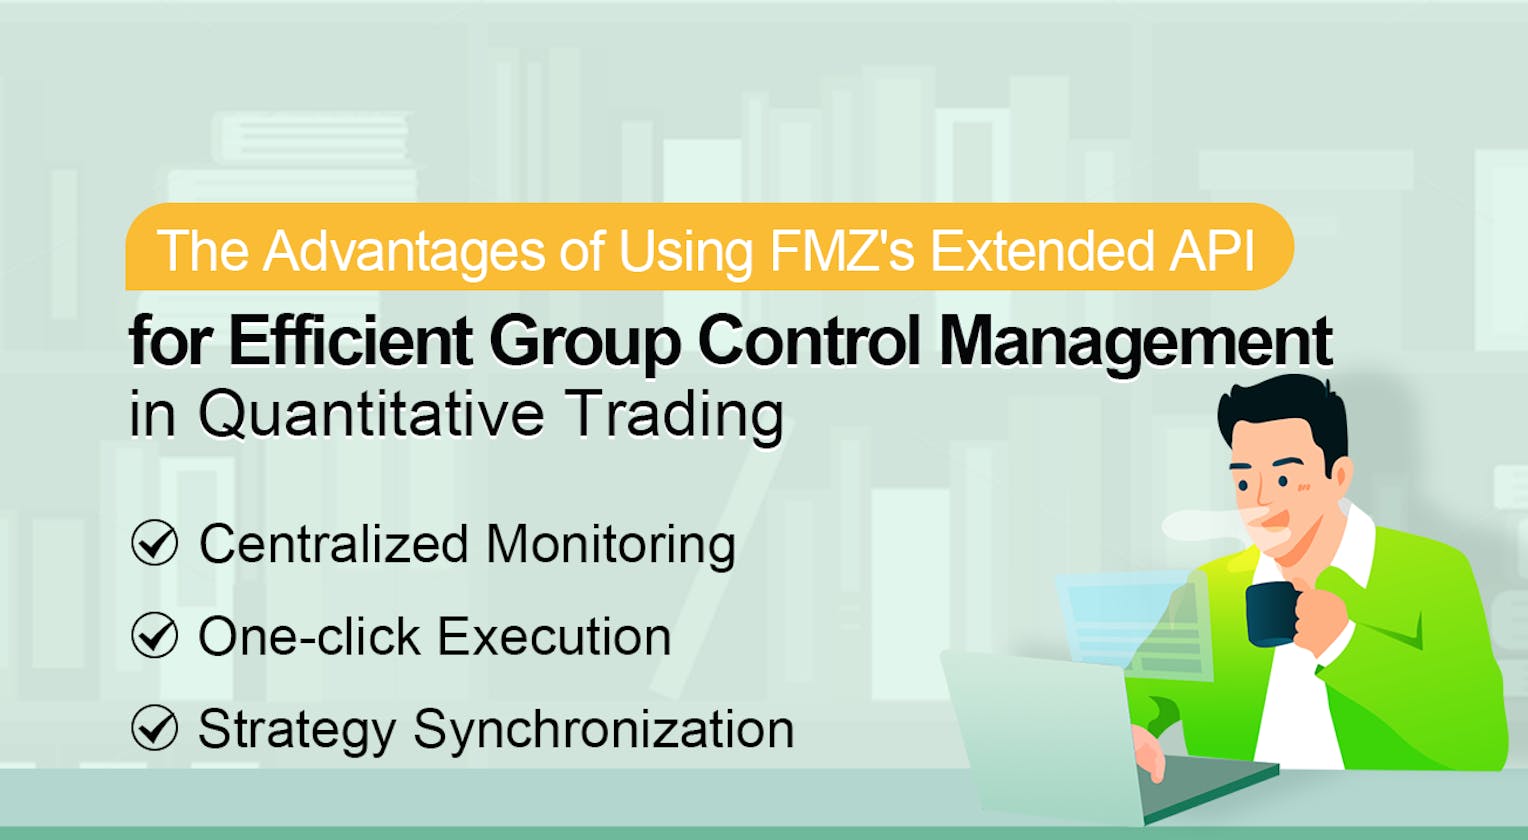 The Advantages of Using FMZ's Extended API for Efficient Group Control Management in Quantitative Trading